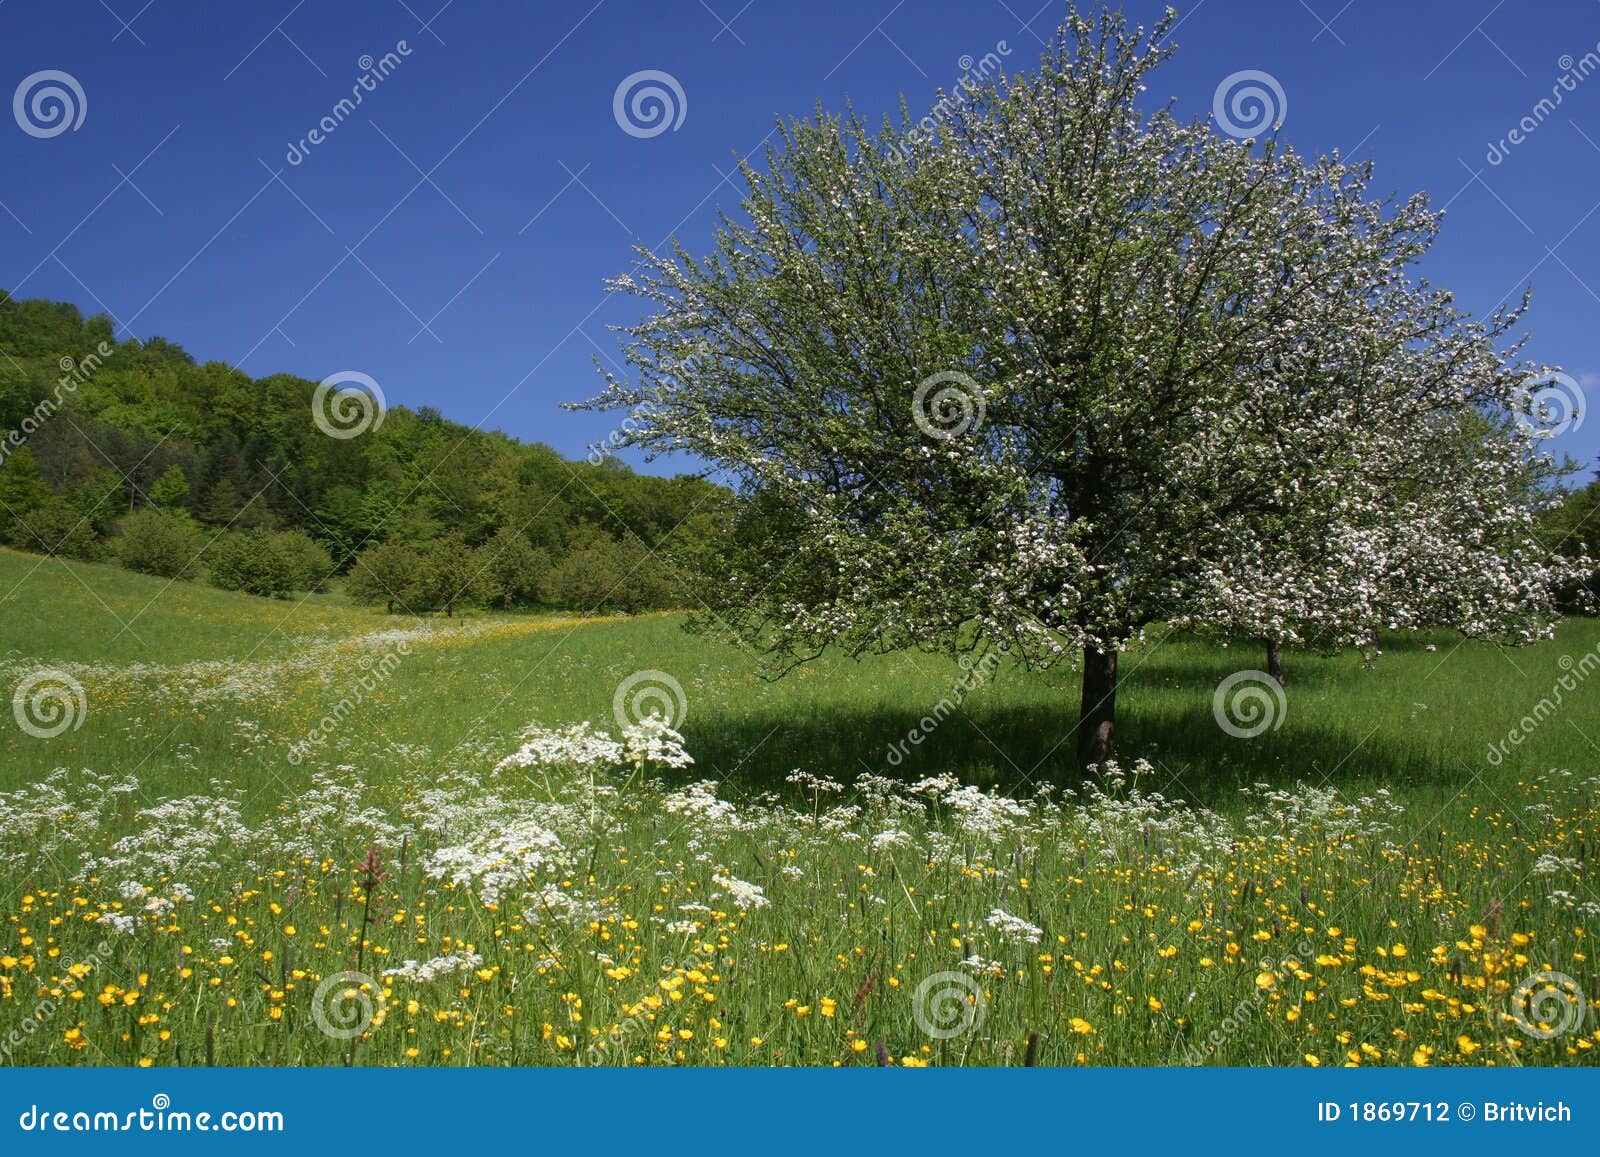 spring meadows with apple tree